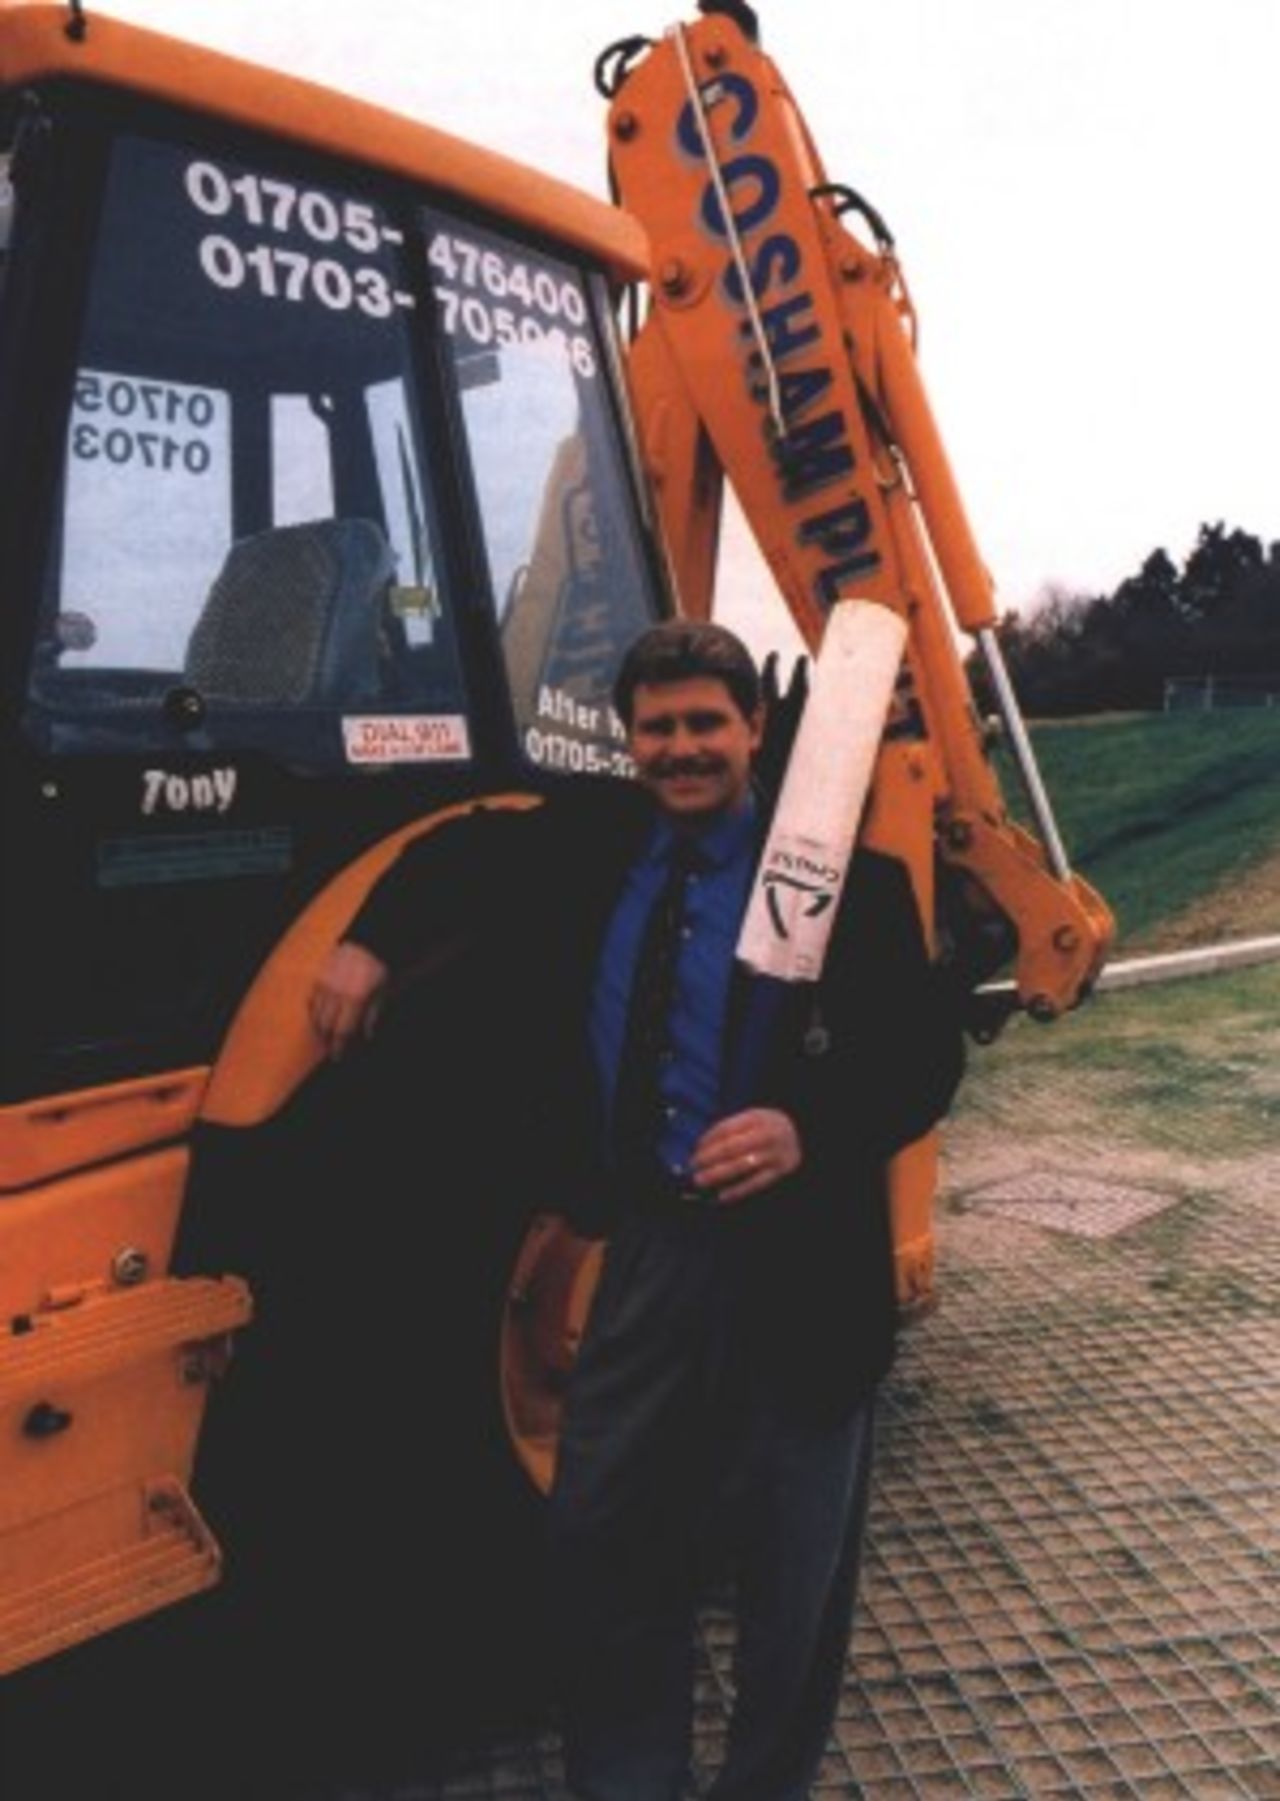 Hampshire captain Robin Smith overlooks the start of Building work at the New Ground in West End.